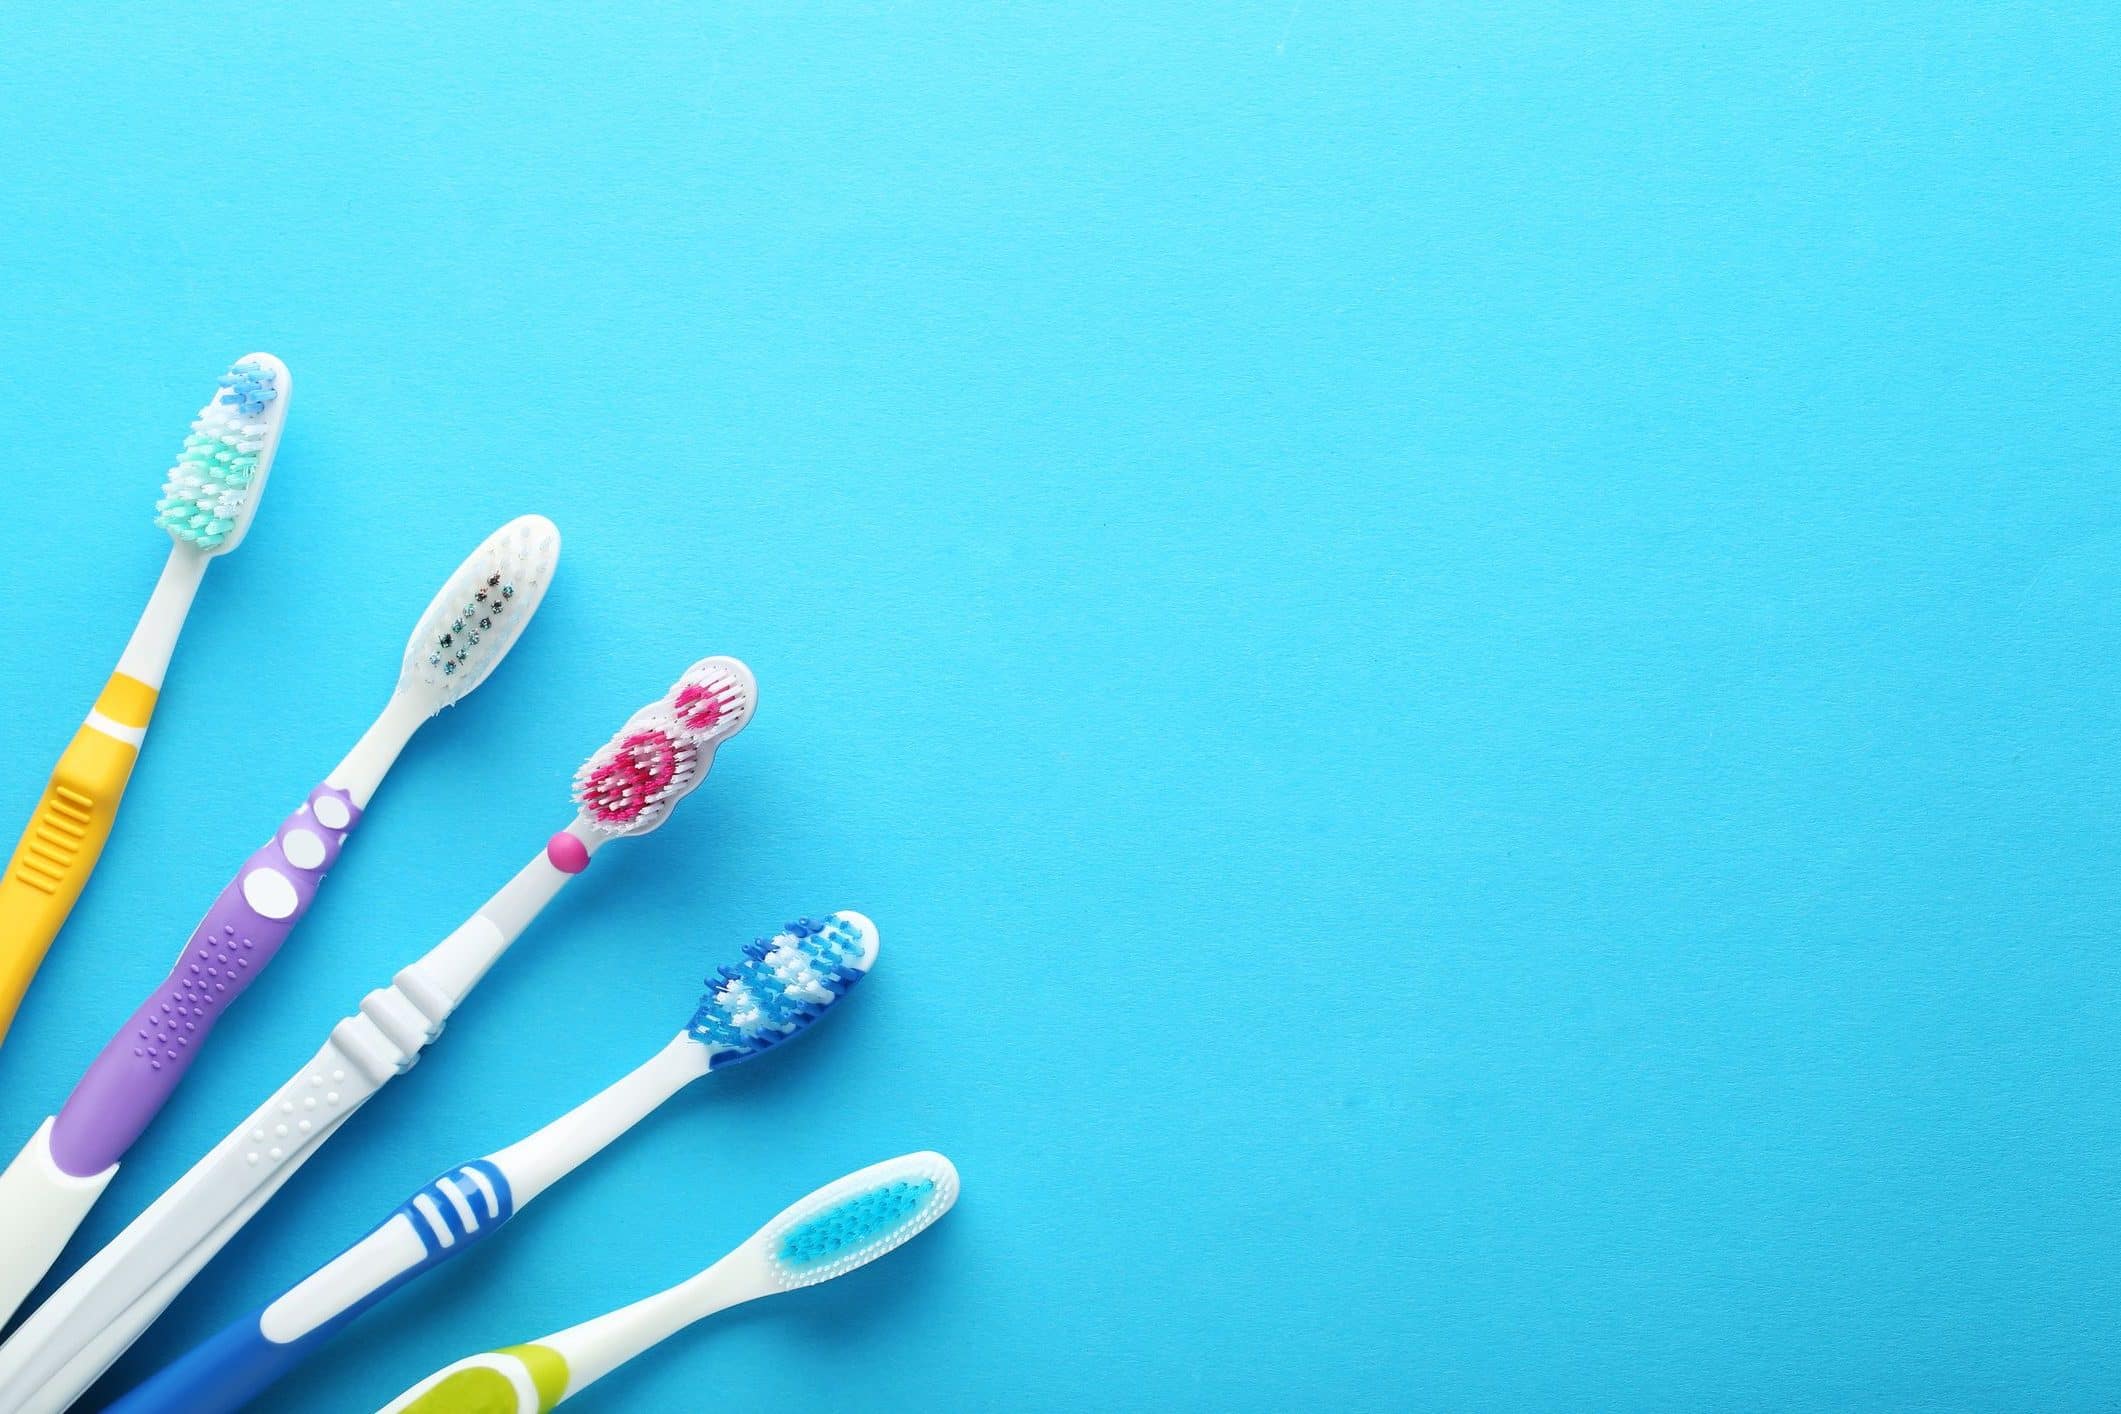 toothbrushes-on-blue-background-royalty-free-image